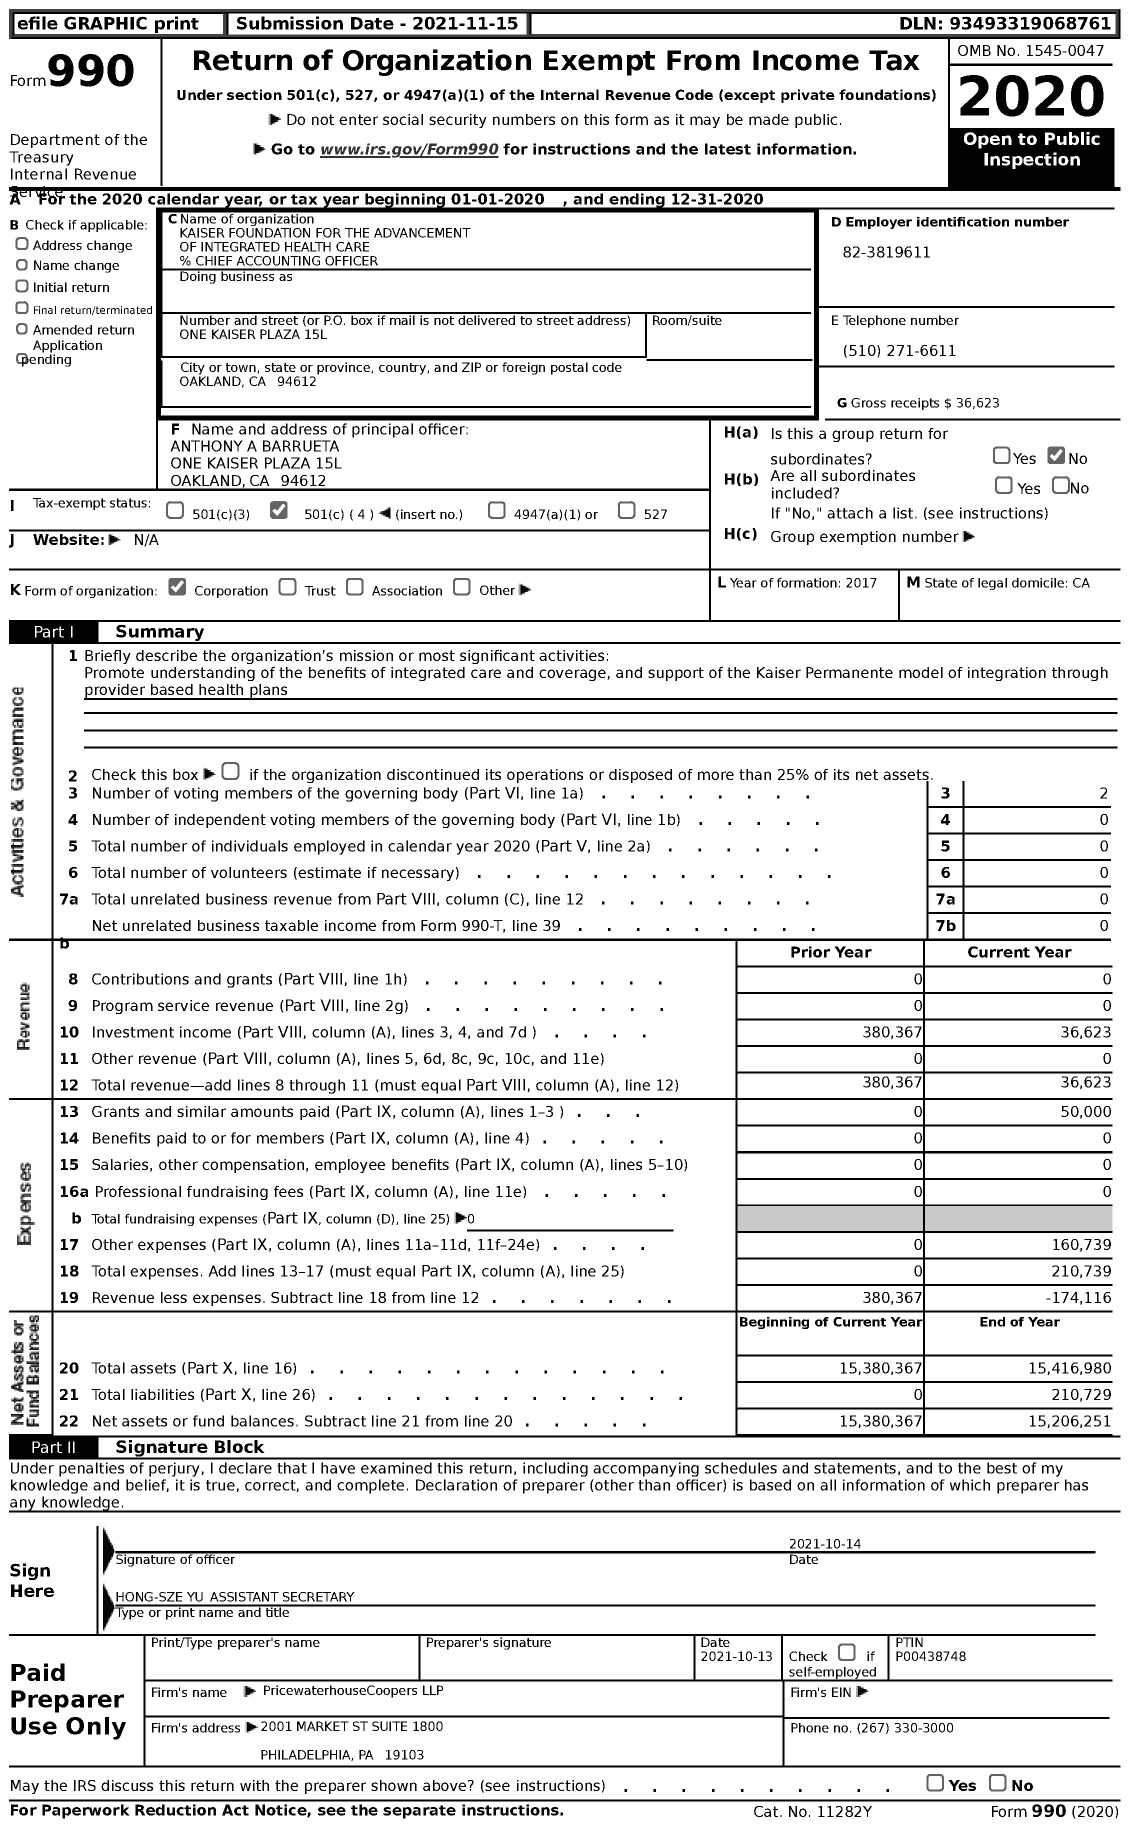 Image of first page of 2020 Form 990 for Kaiser Foundation for the Advancement of Integrated Health Care